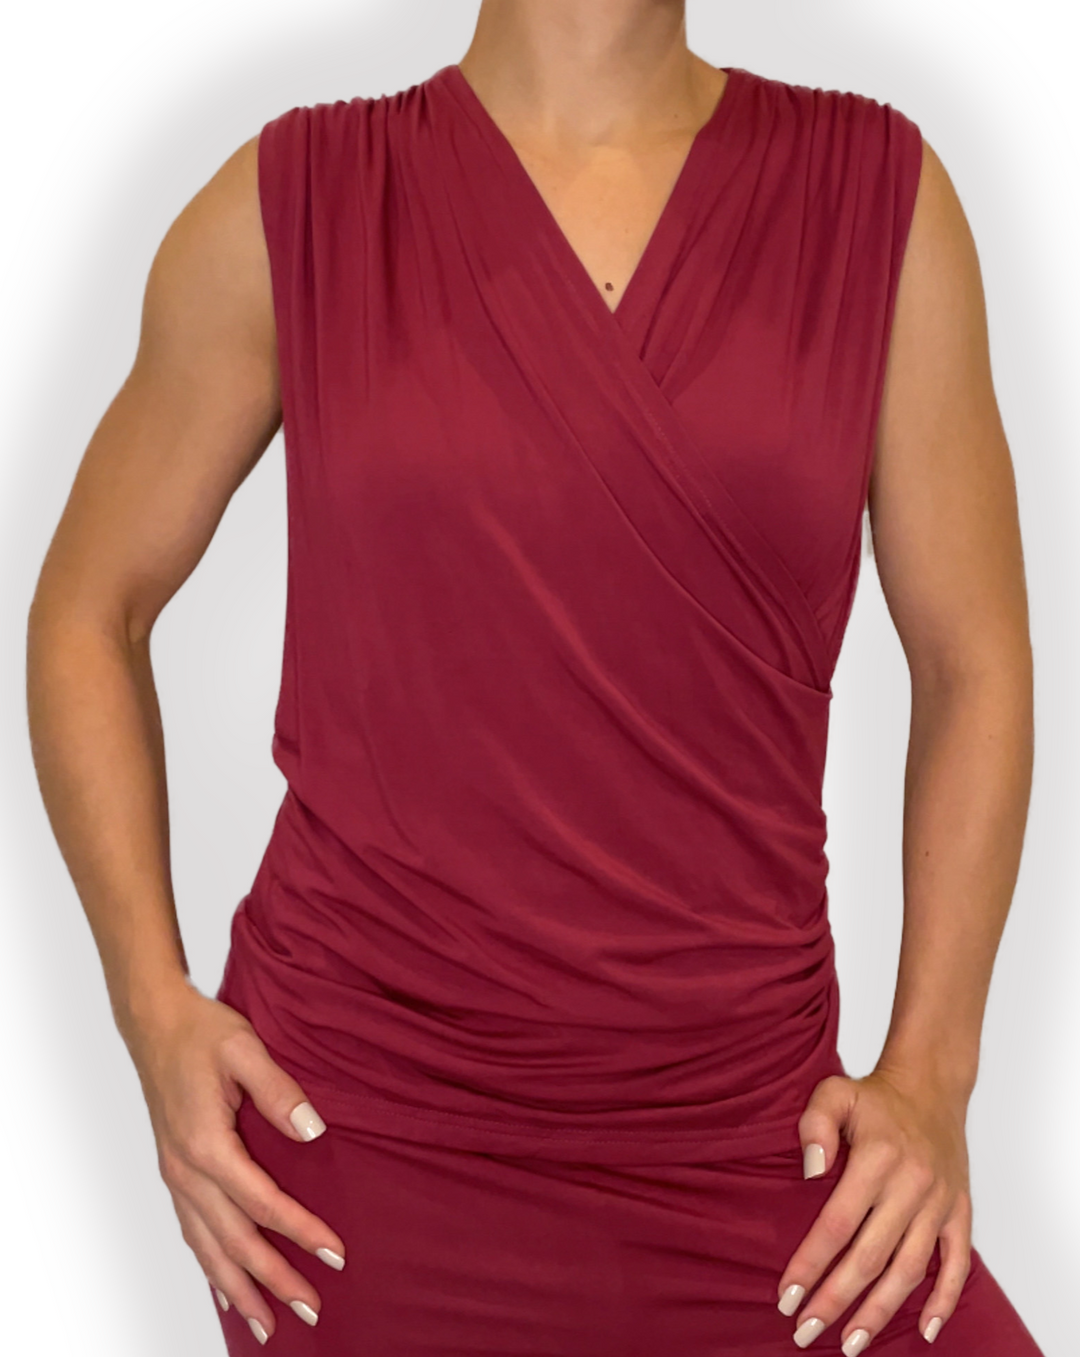 Stylish MELANIE Braless Bamboo Wrap Tank top in berry red color